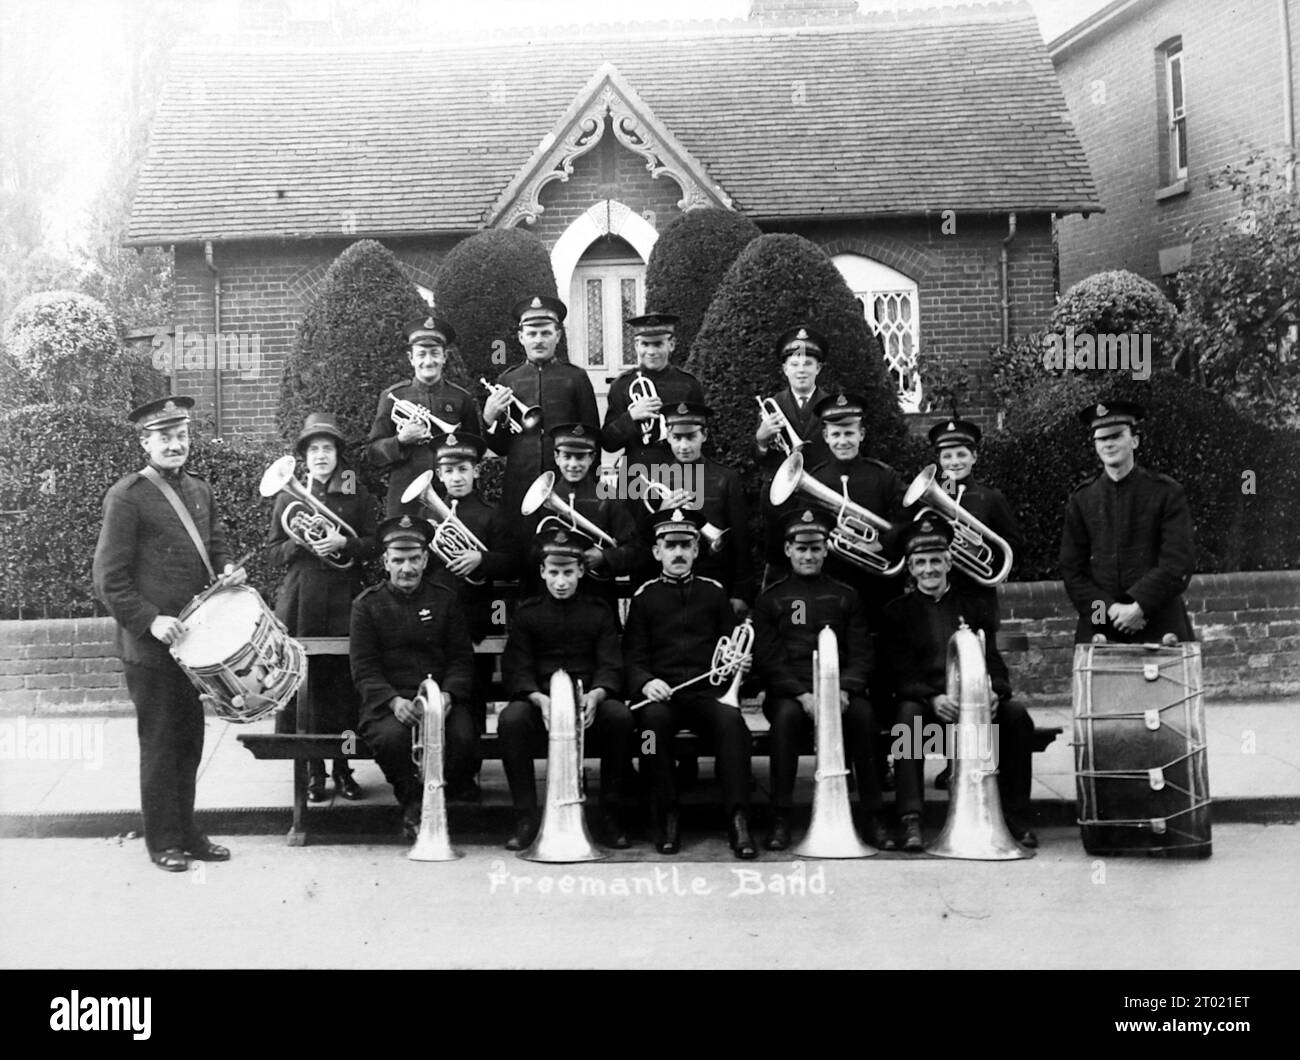 A Salvation Army brass band from Freemantle, Southampton, England, c1920s. From an original photograph of approximately 8x6 inches, which is both undated and unattributed. The photograph shows band members with instruments outside a hut (possibly a Salvation Army hut). Stock Photo